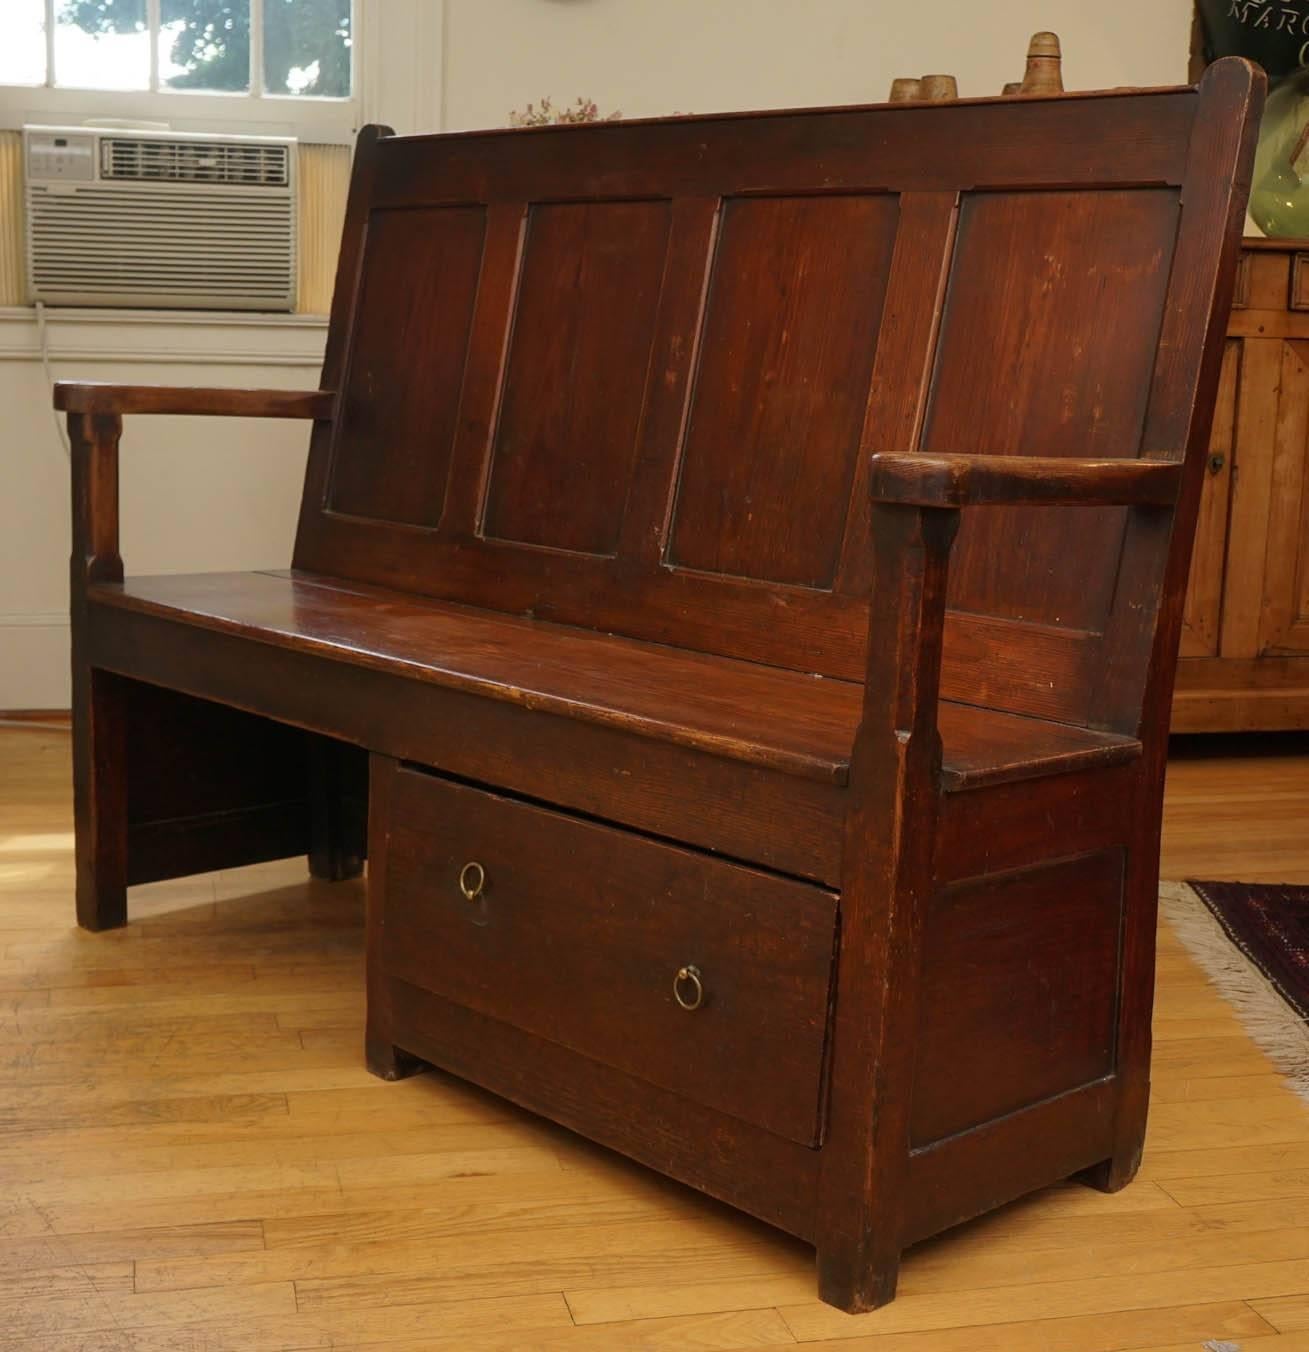 Early 19th Century Welsh Bench with One Drawer